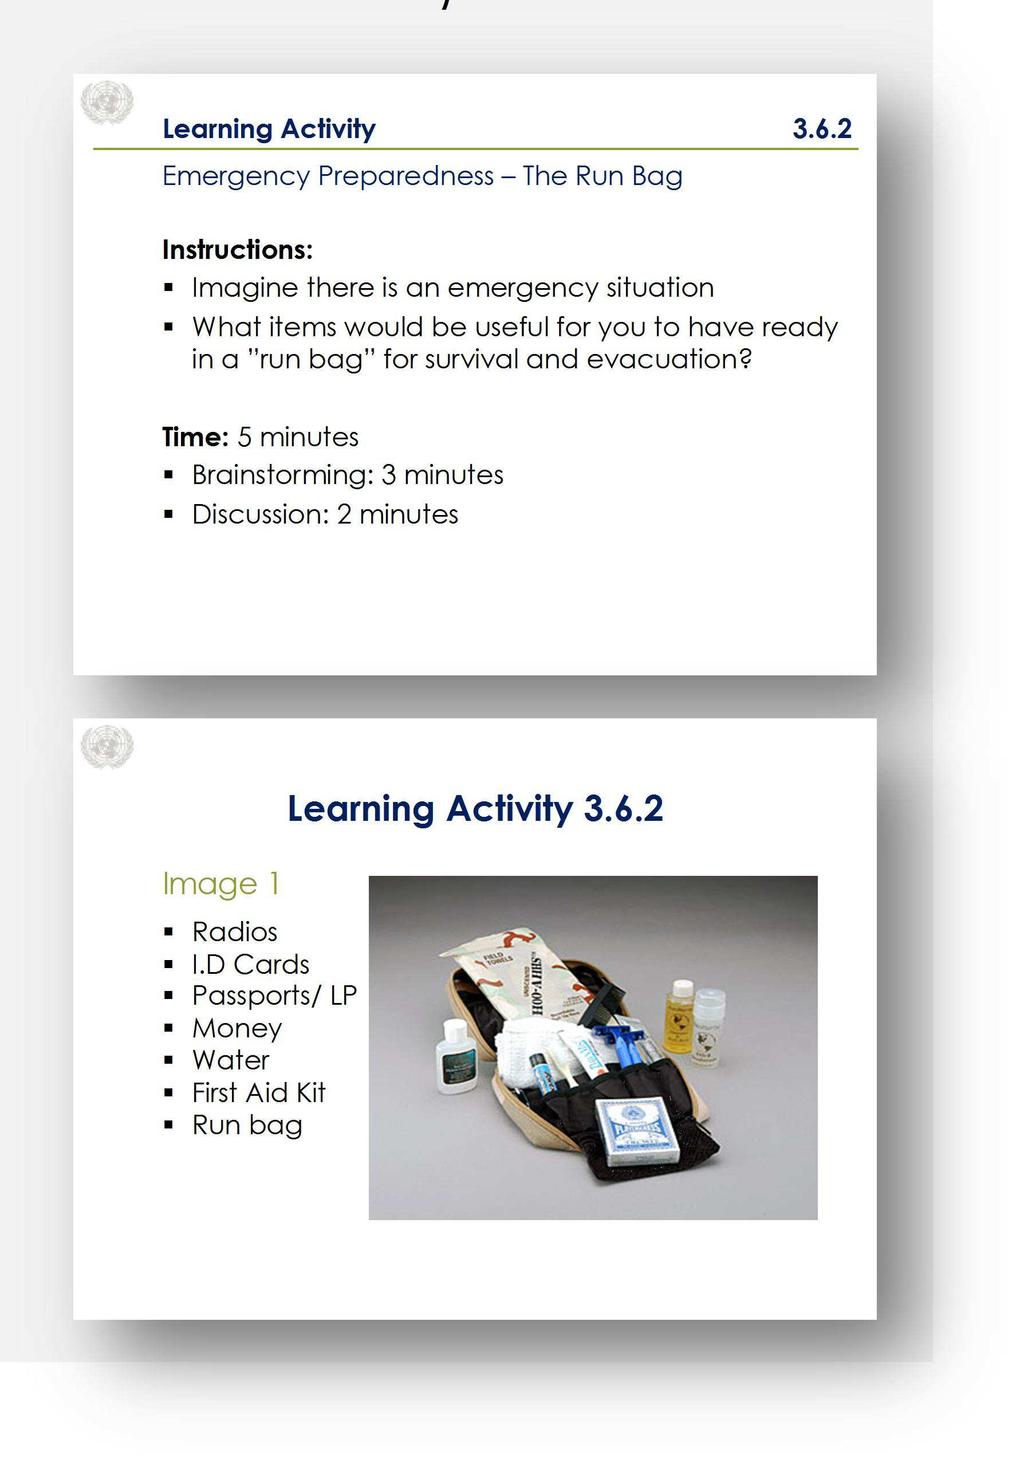 Learning Activity 3.6.